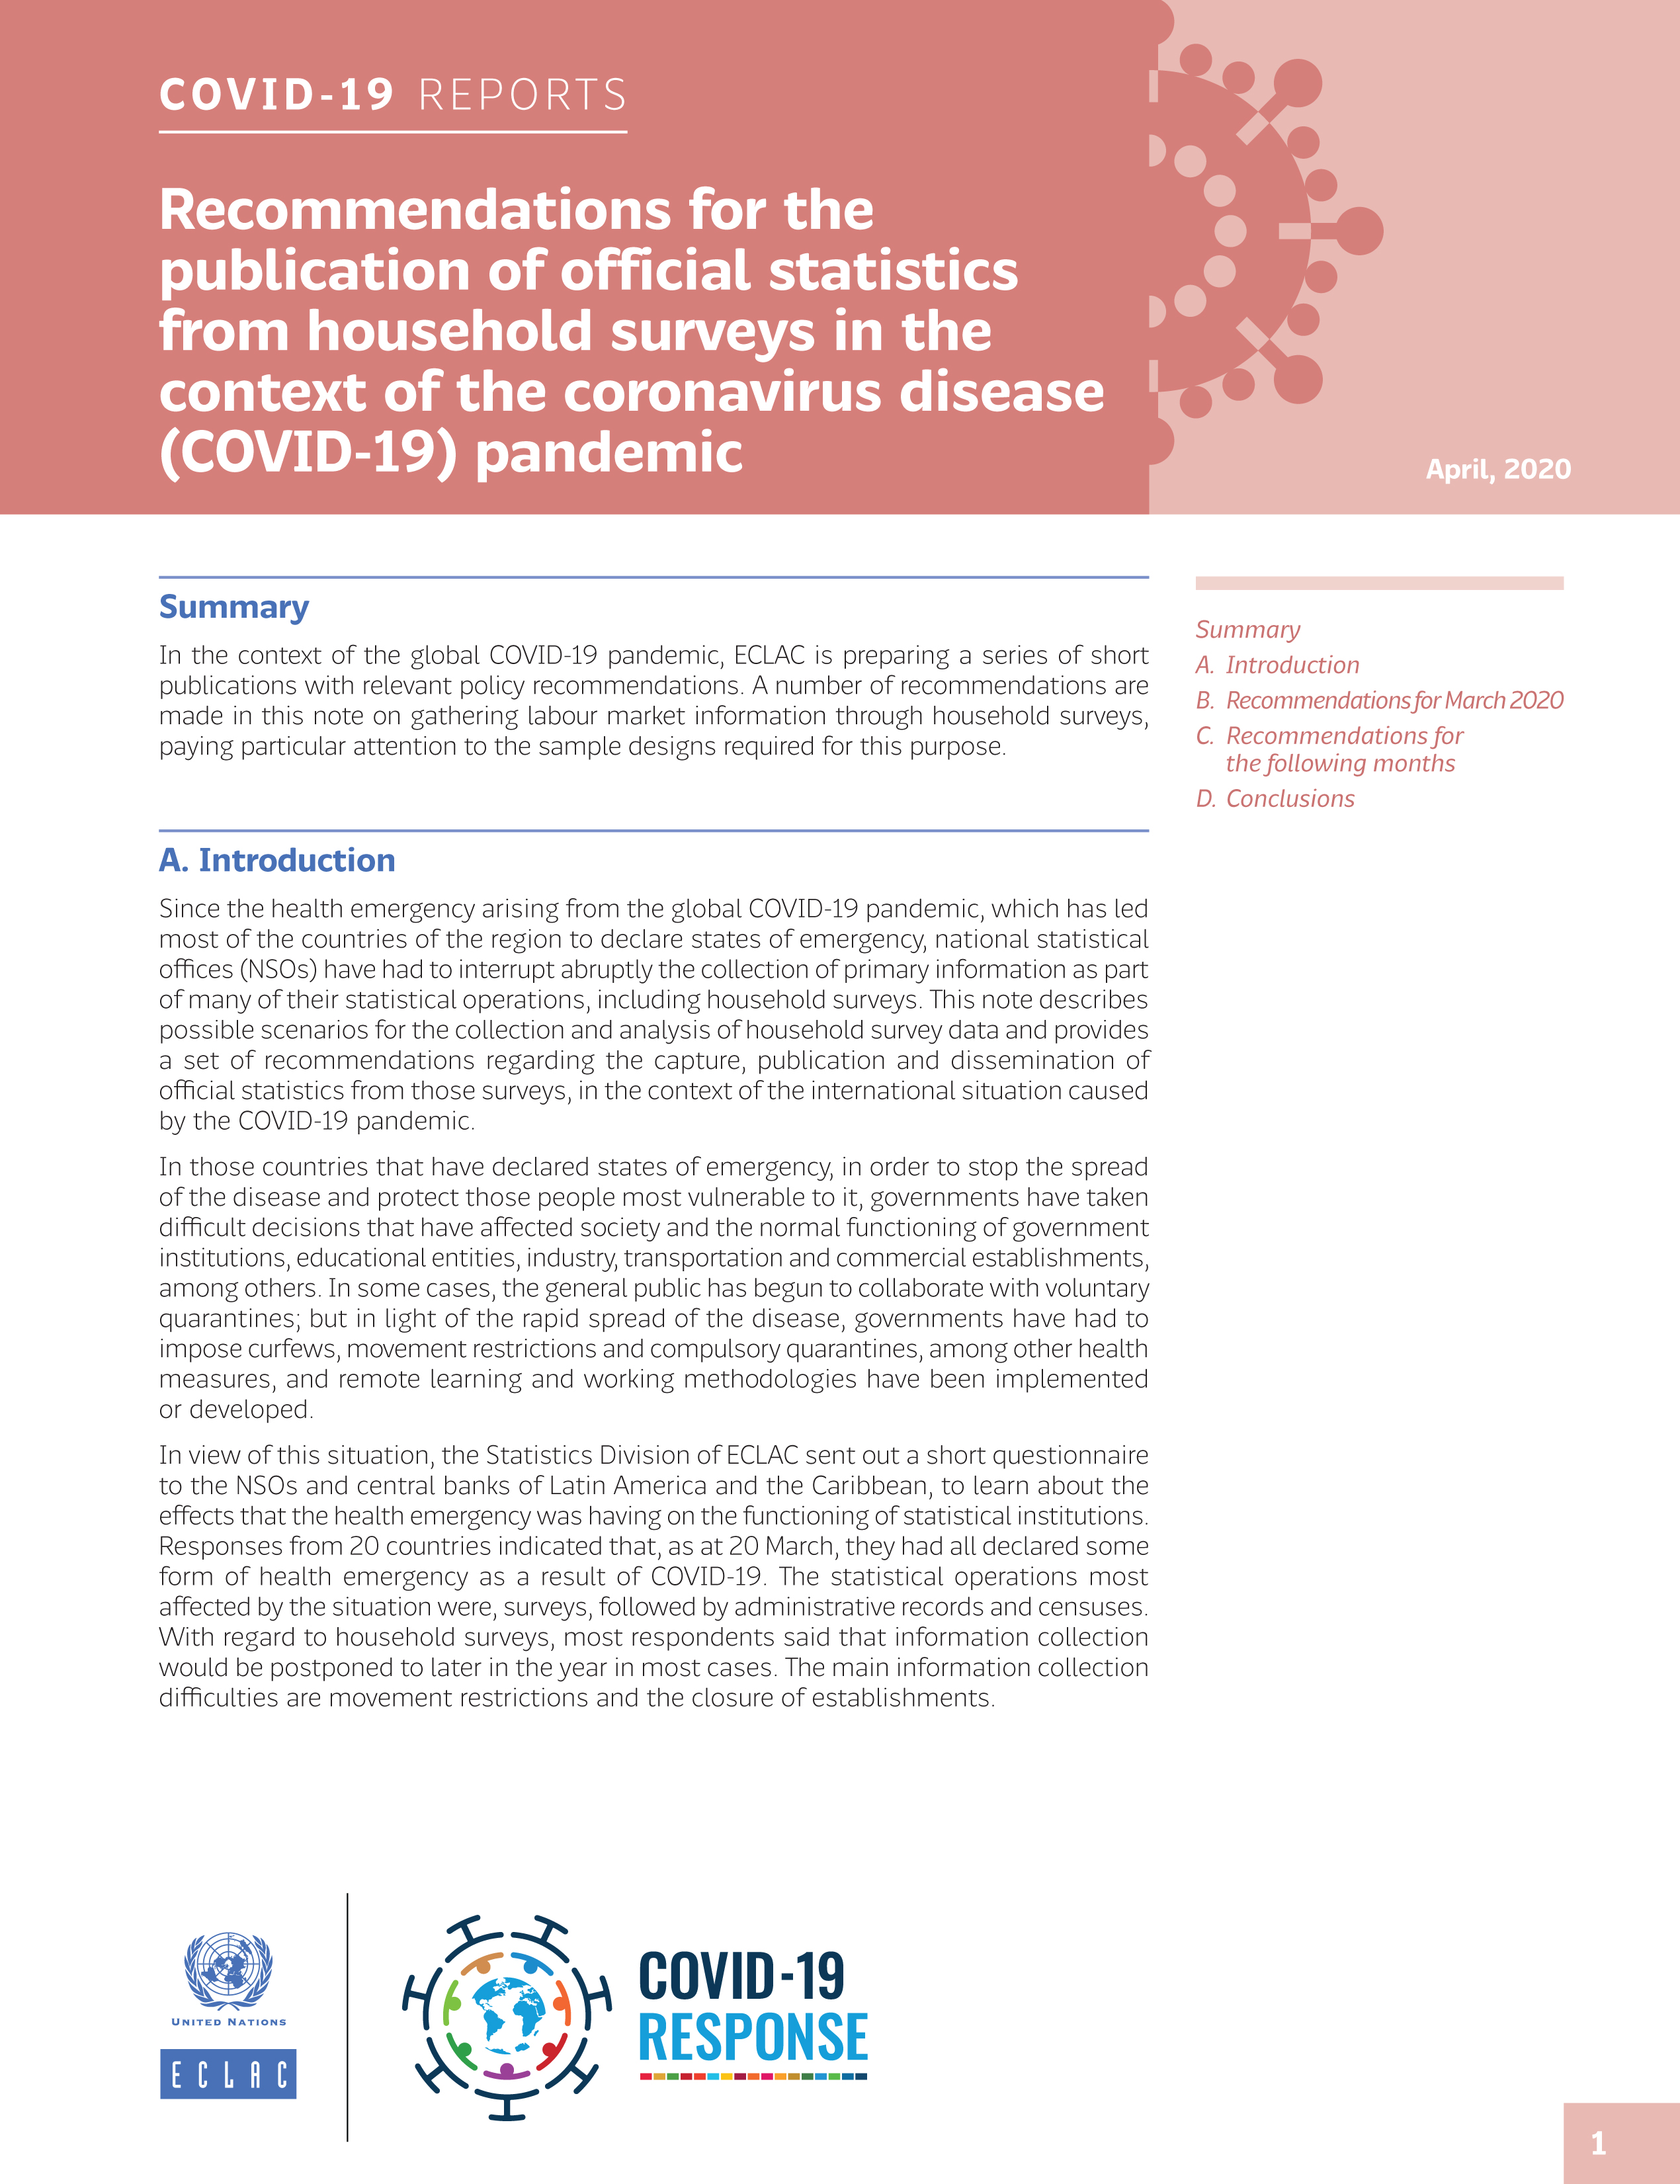 image of Recommendations for the Publication of Official Statistics from Household Surveys in the Context of the Coronavirus Disease (COVID-19) Pandemic